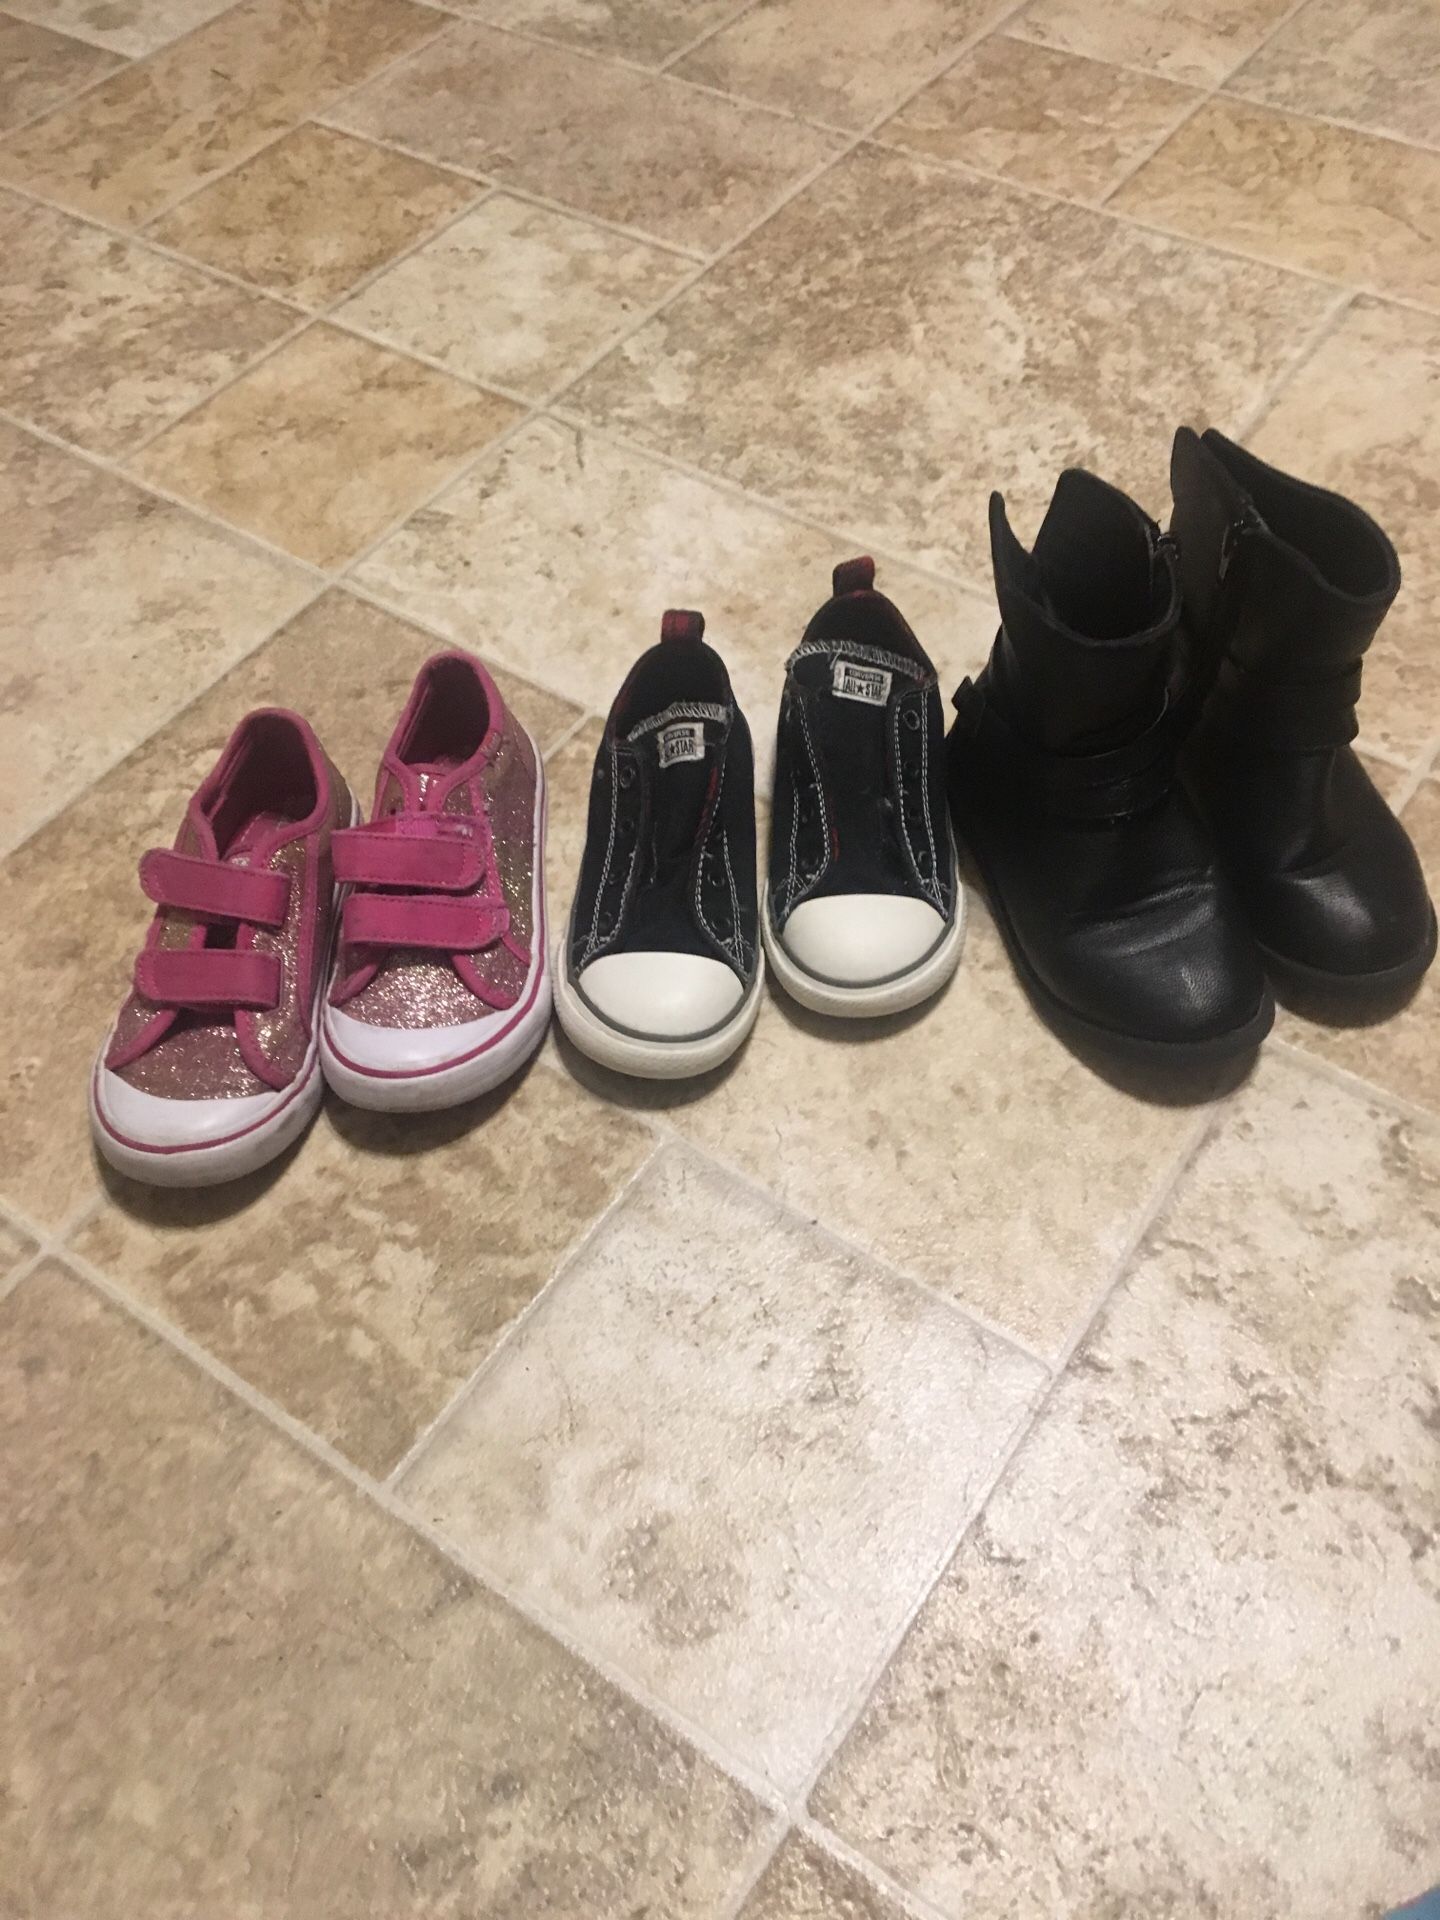 Girls sneakers and boots